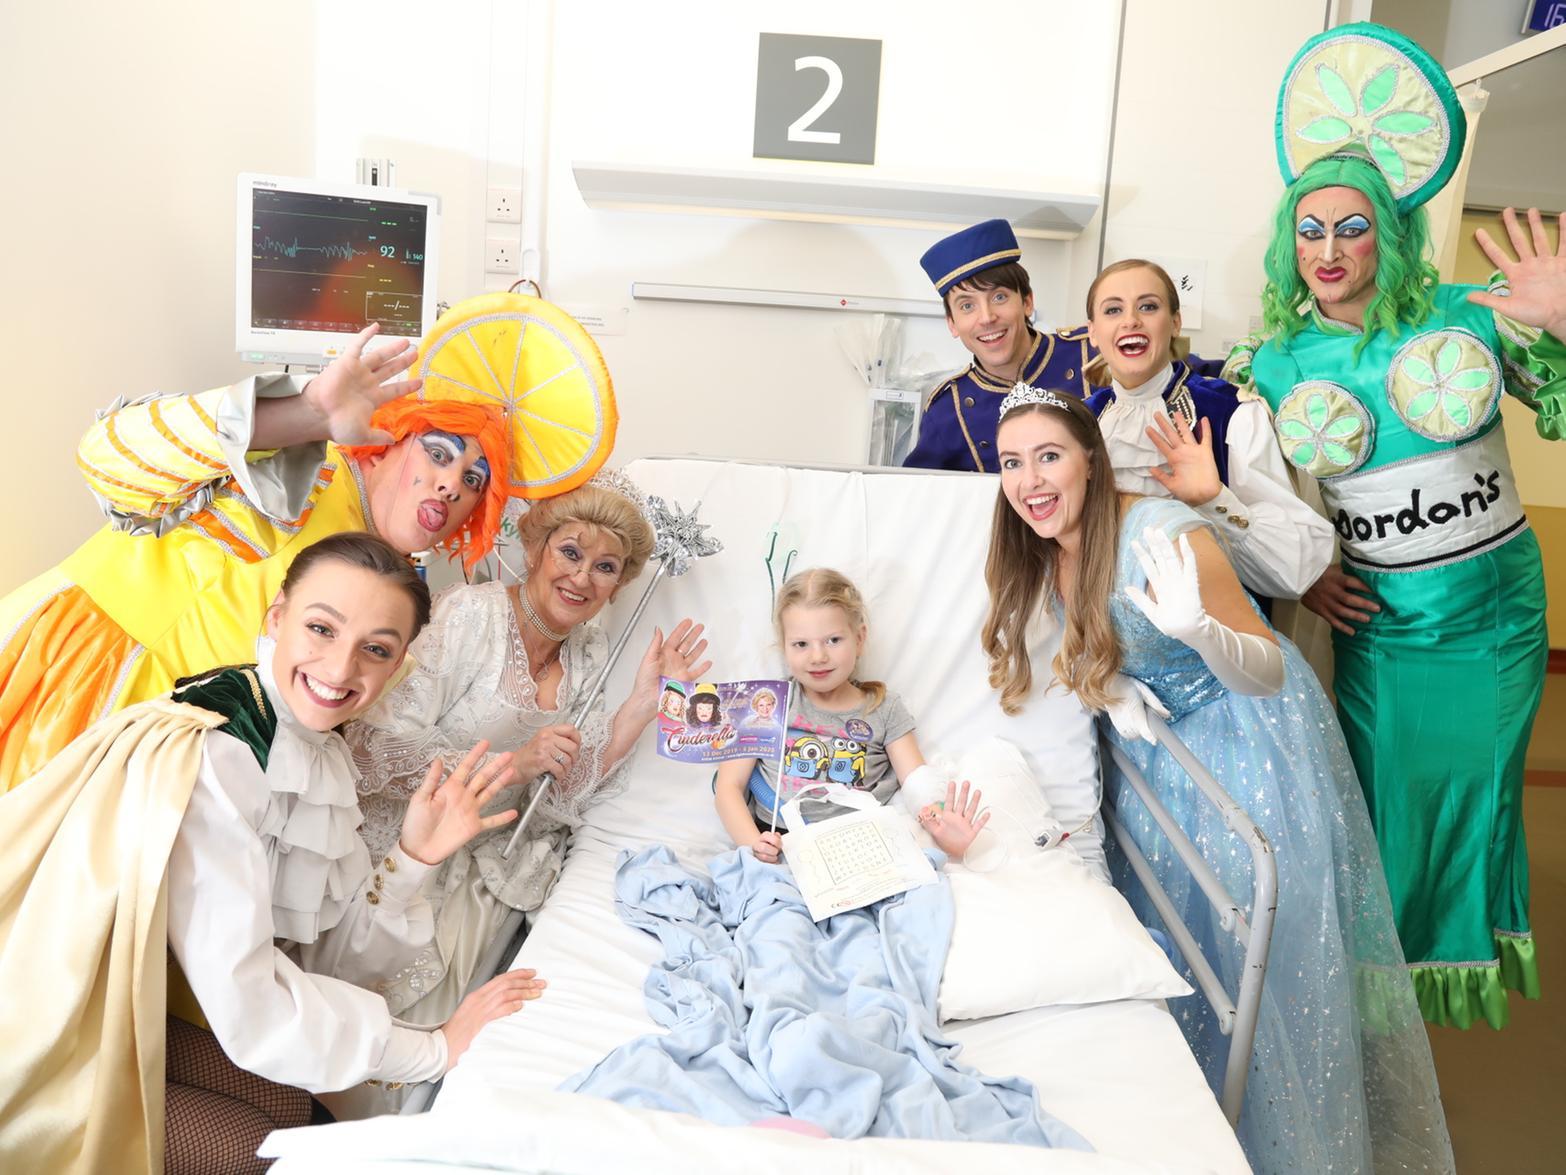 Natalia, five, was given a goody bag by the cast. Her mum, Aleksandra, said Natalia loves the story of Cinderella.